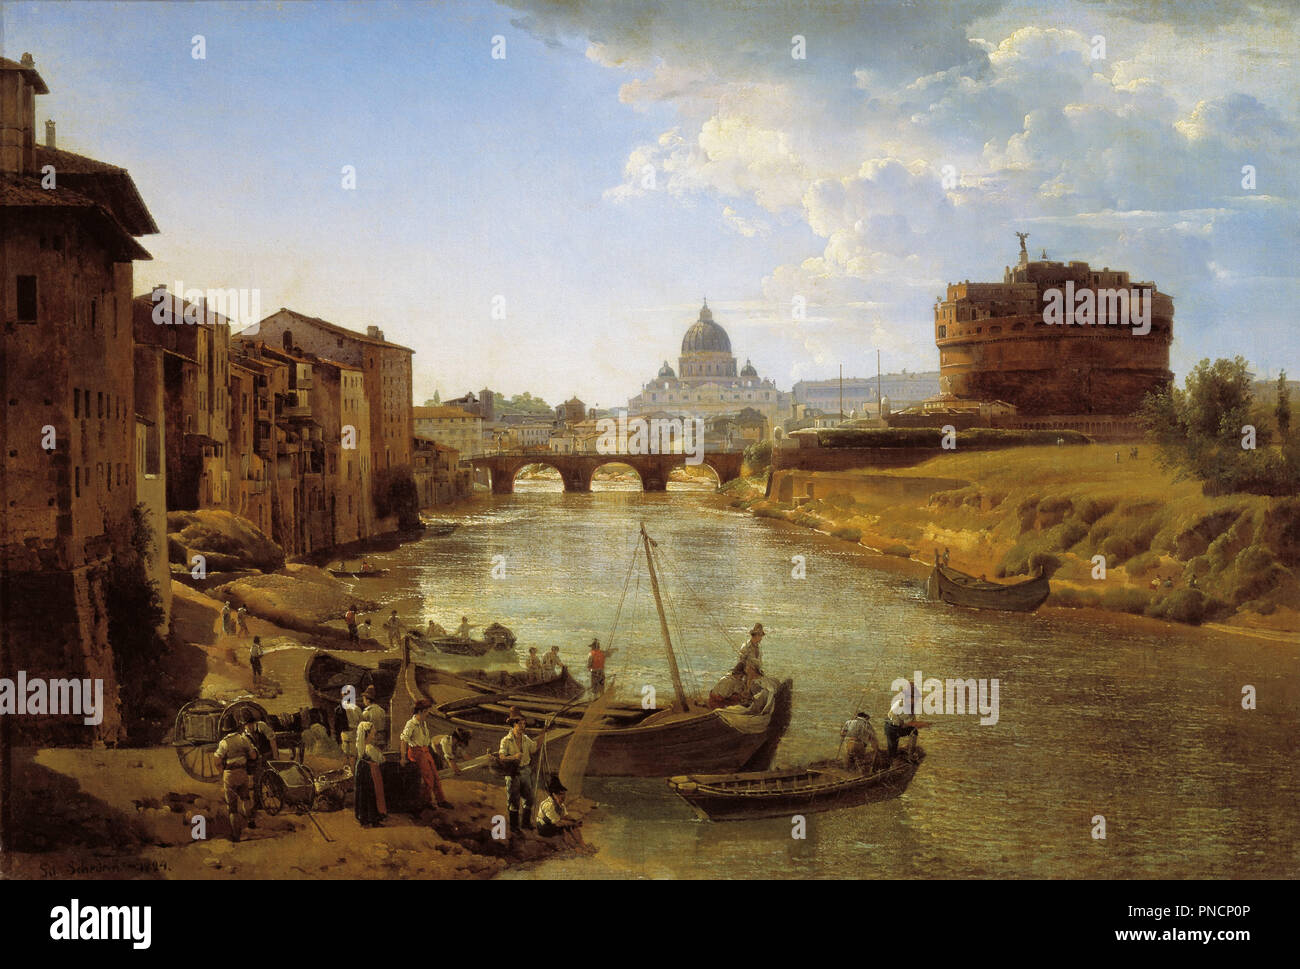 New Rome. The Castle of S.Angelo. Date/Period: 1824/1825. Painting. Oil on canvas. Height: 45.6 cm (17.9 in); Width: 67.2 cm (26.4 in). Author: Sylvester Shchedrin. SILVESTR FEODOSSIJEWITSCH SCHTSCHEDRIN. Stock Photo